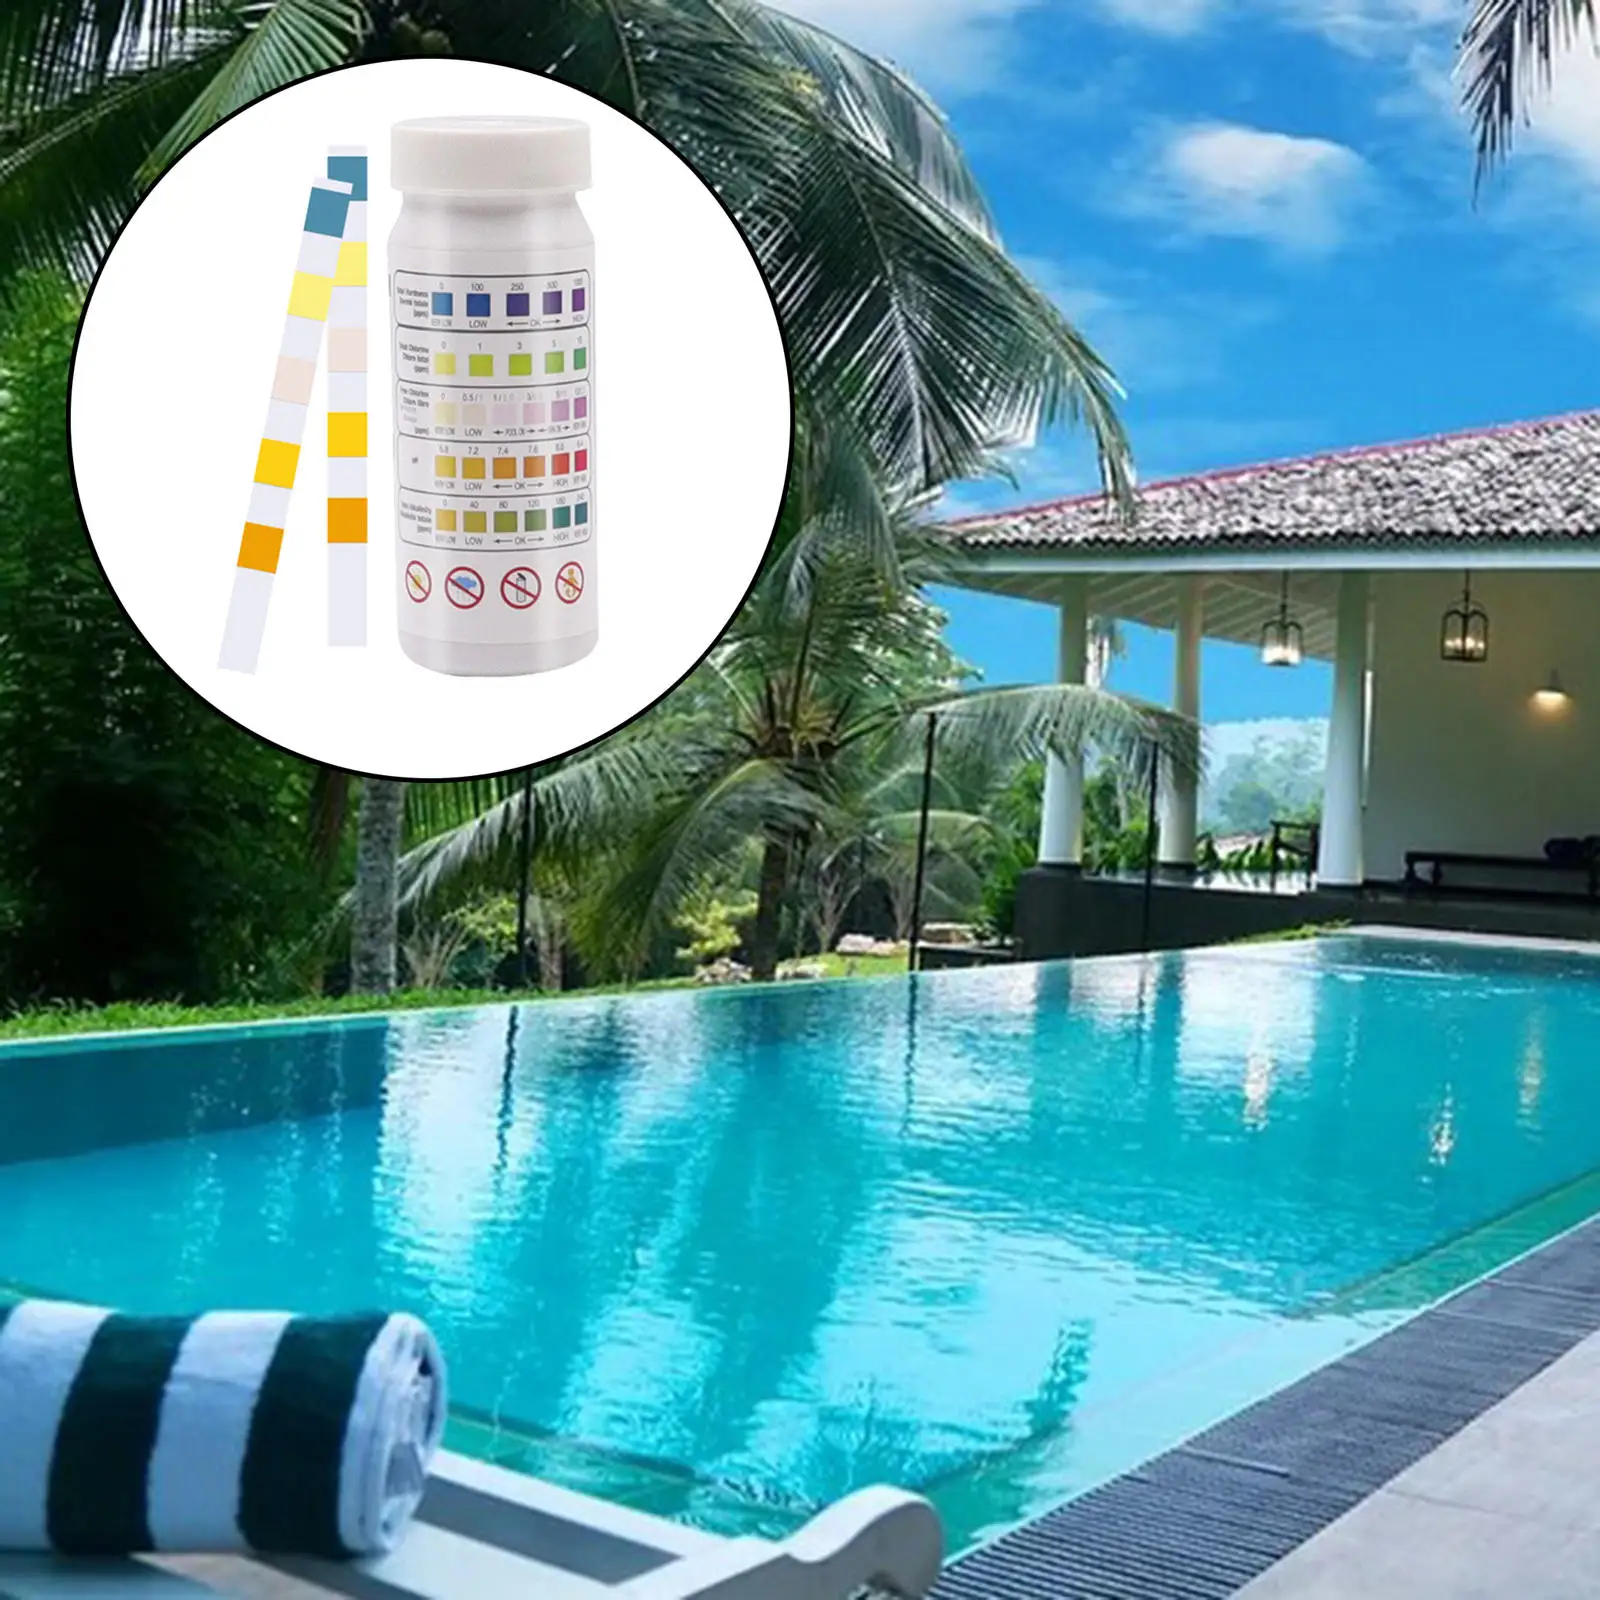 50x Pool Water Quality 4-In-1 Test Strip Alkalinity Hardness Fast Accurate